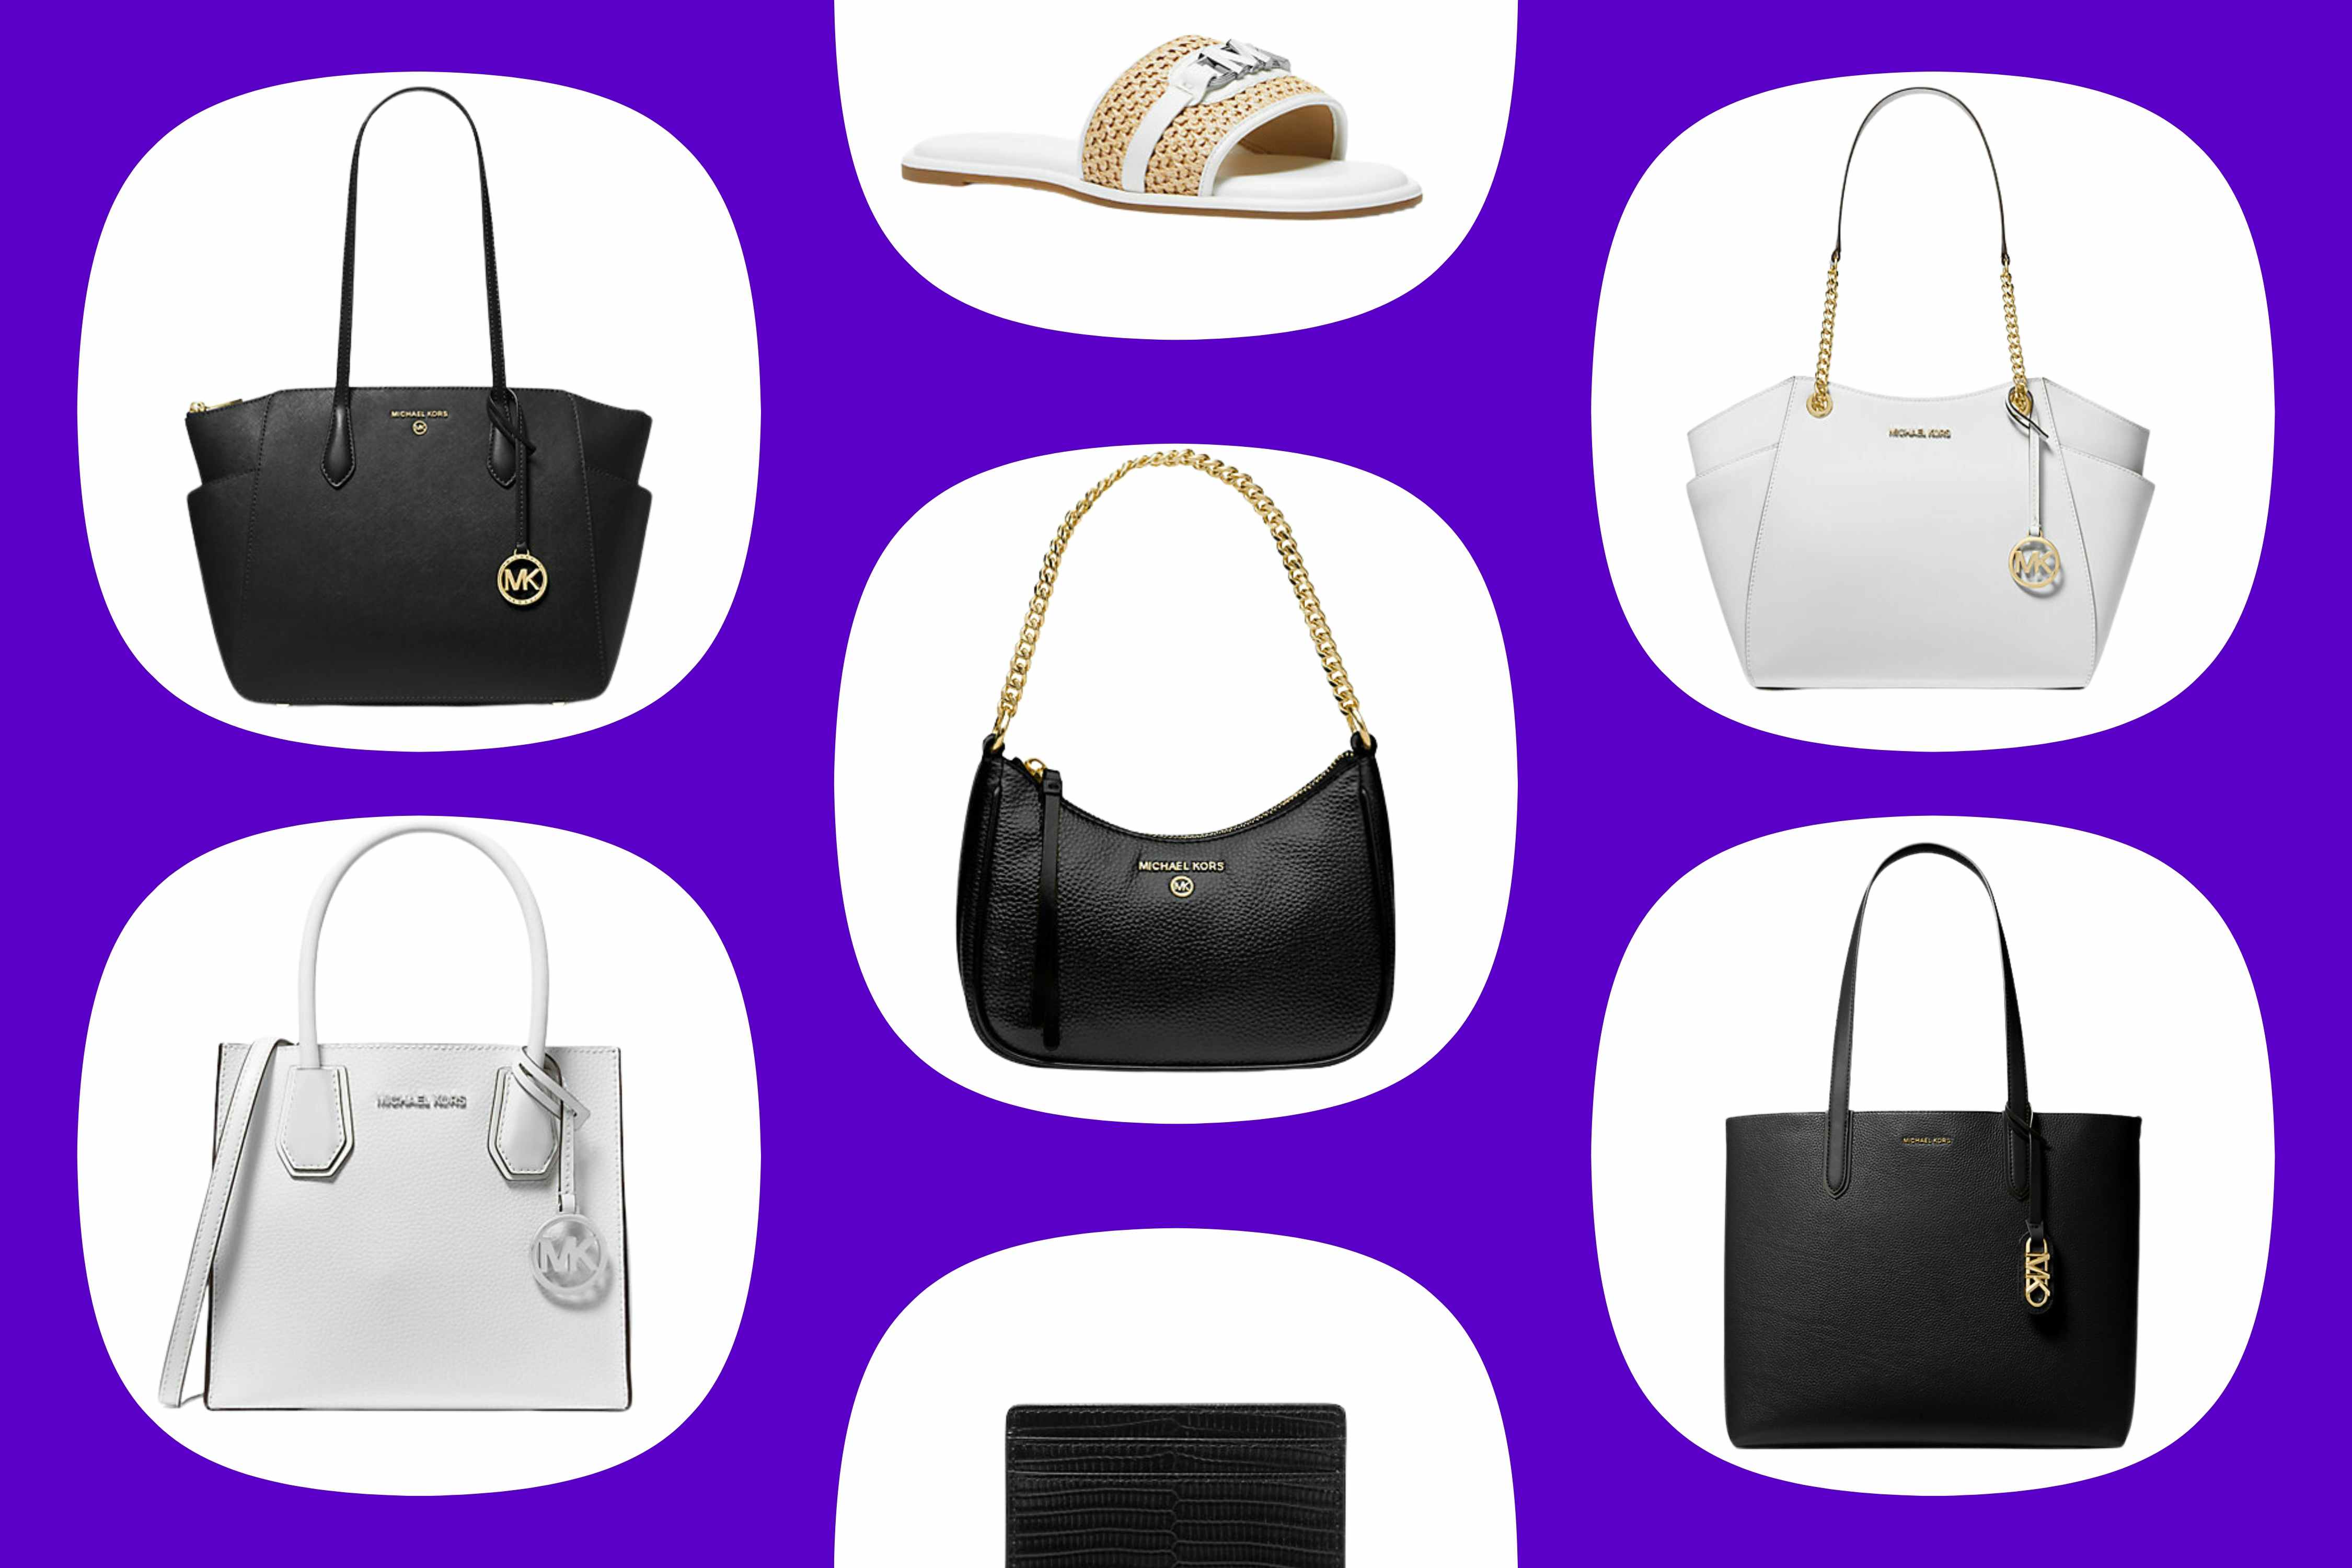 Michael Kors VIP Early Access Sale: $52 Wristlet, $171 Tote Bag, and More